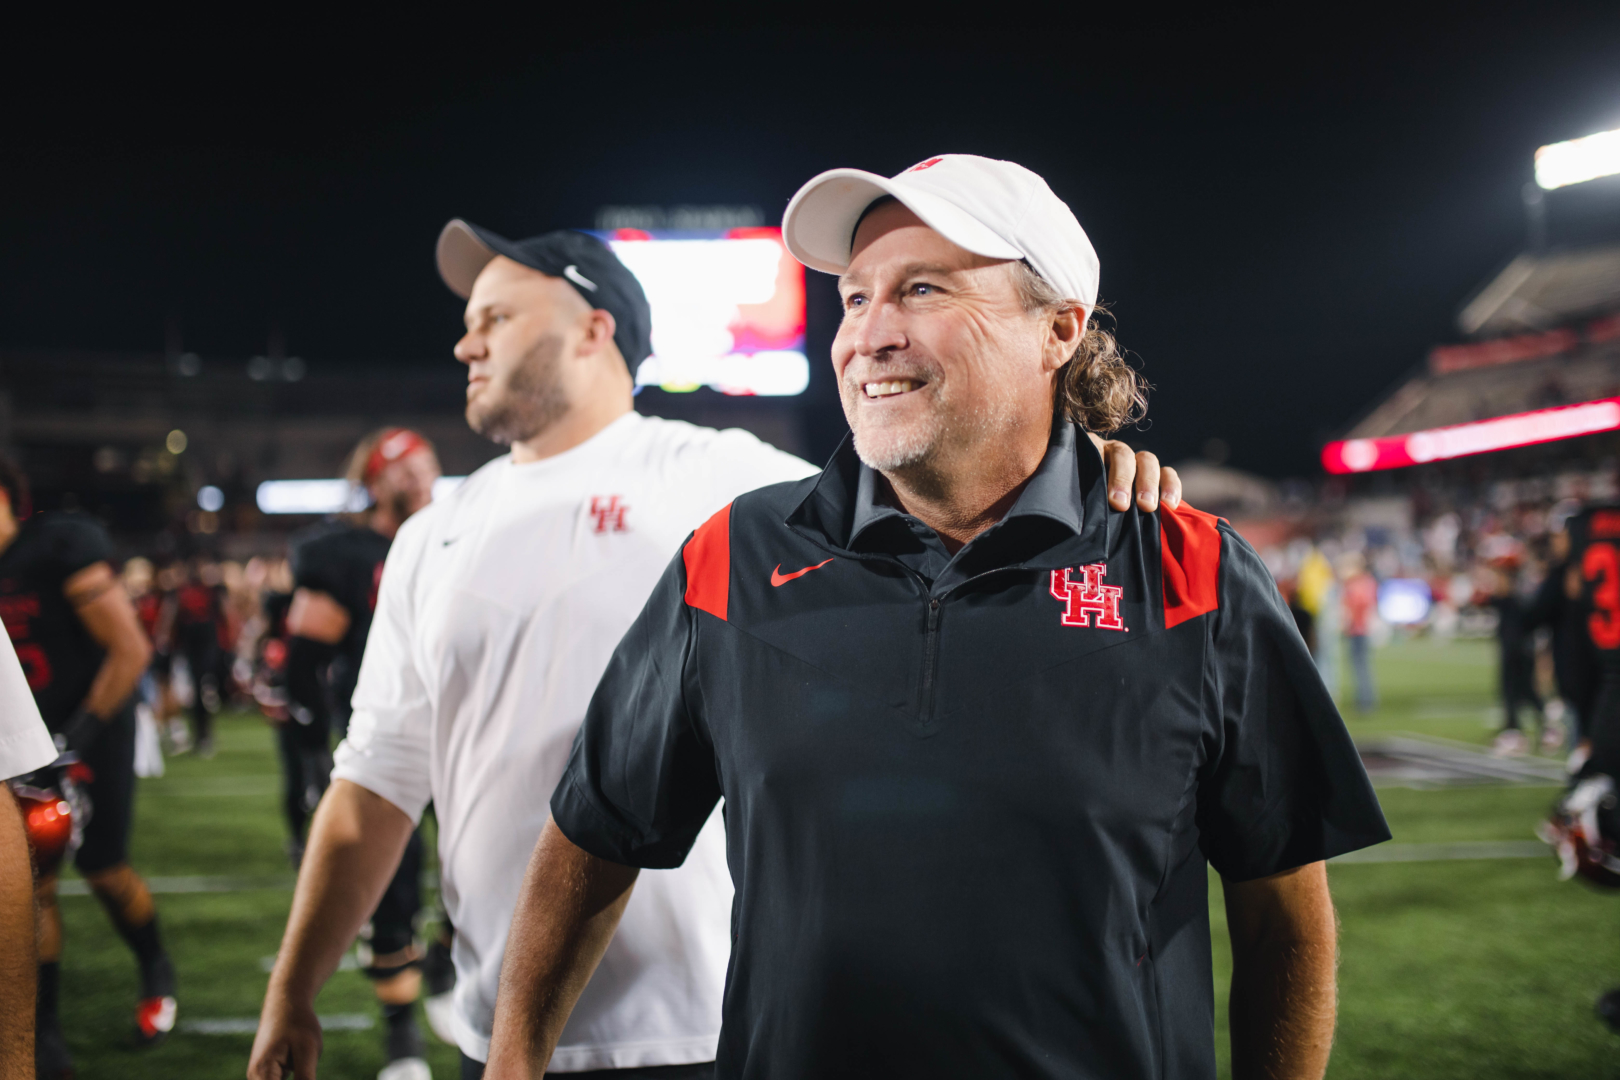 In his first three seasons at UH, Dana Holgorsen has led the Cougars to a 19-15 record including a 12 win 2021 season. | James Schillinger/The Cougar